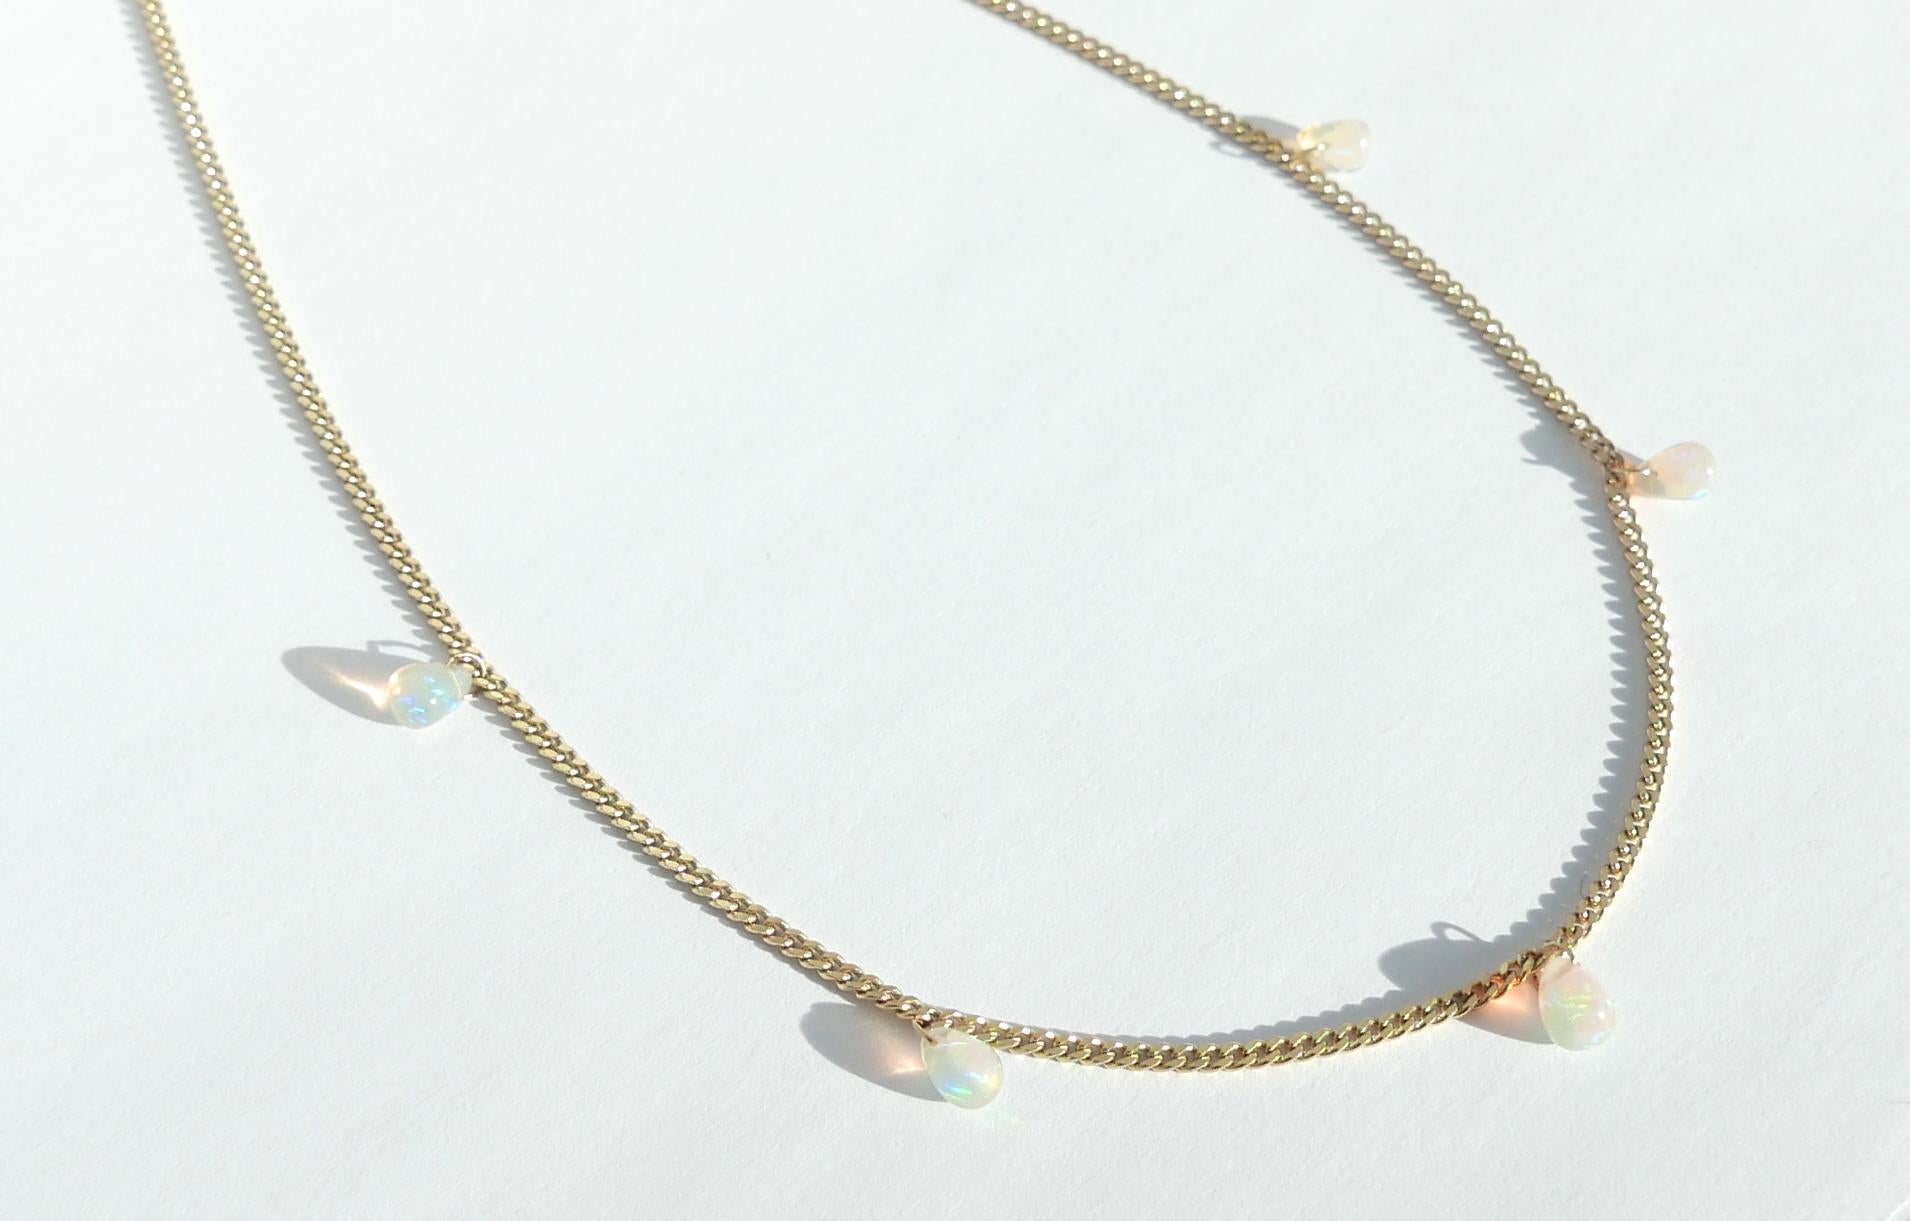 This contemporary necklace features five Ethiopian opal drops dangling from a sleek 18 karat gold curb chain.  Measuring just under 2mm wide, the chain is 16 inches long and is finished with a lobster catch.  The opals display a rainbow-like